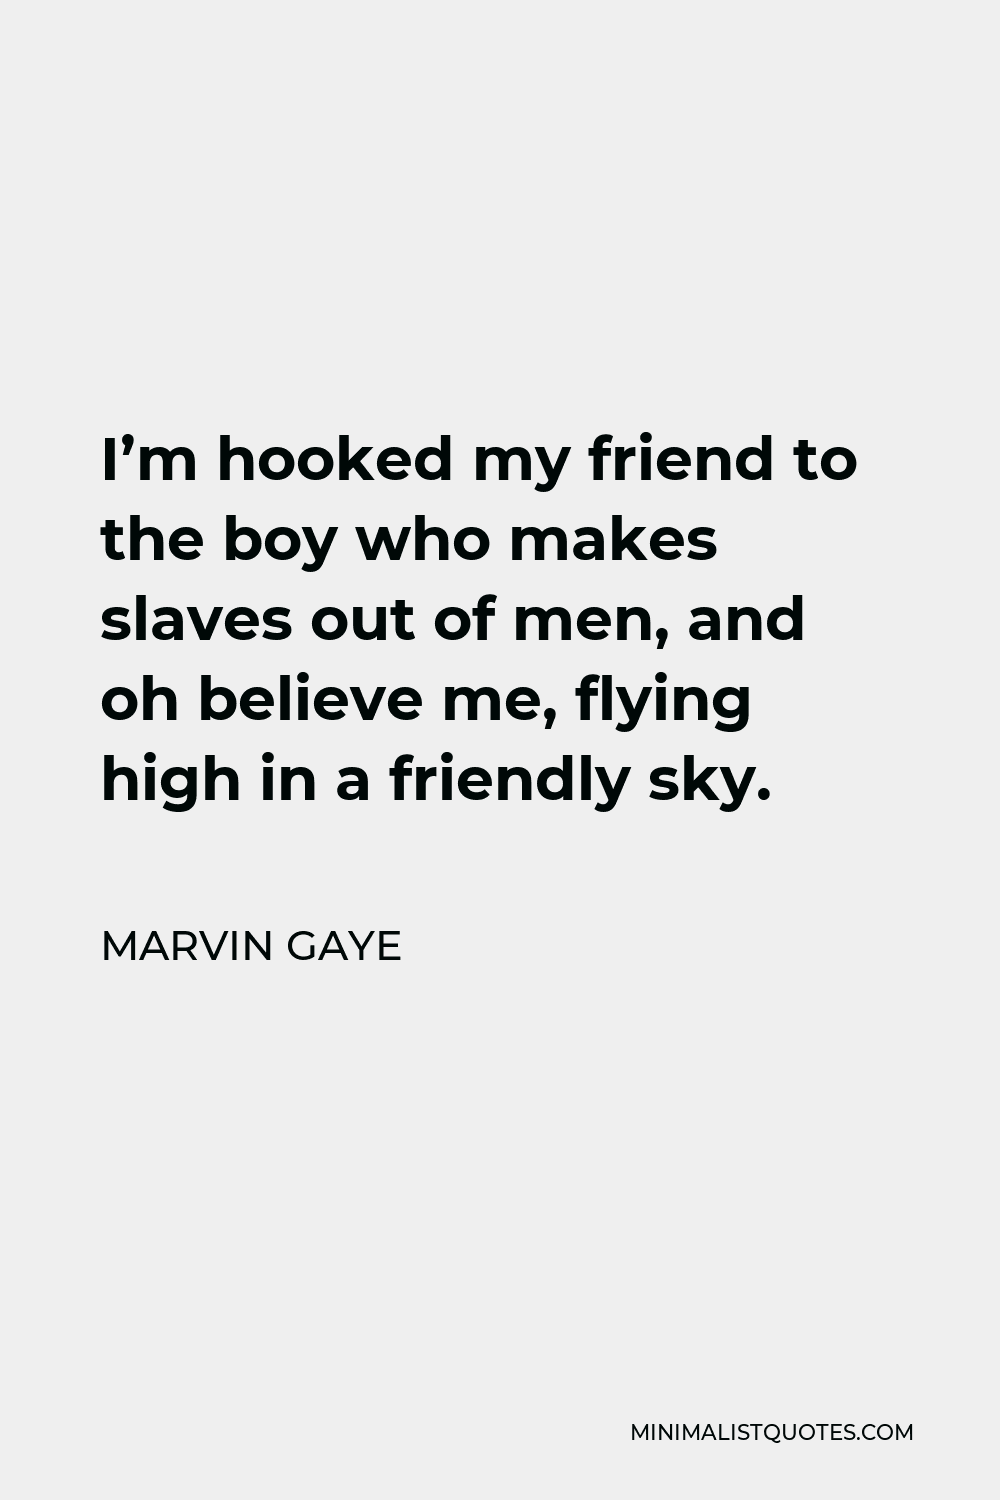 Marvin Gaye Quote - I’m hooked my friend to the boy who makes slaves out of men, and oh believe me, flying high in a friendly sky.